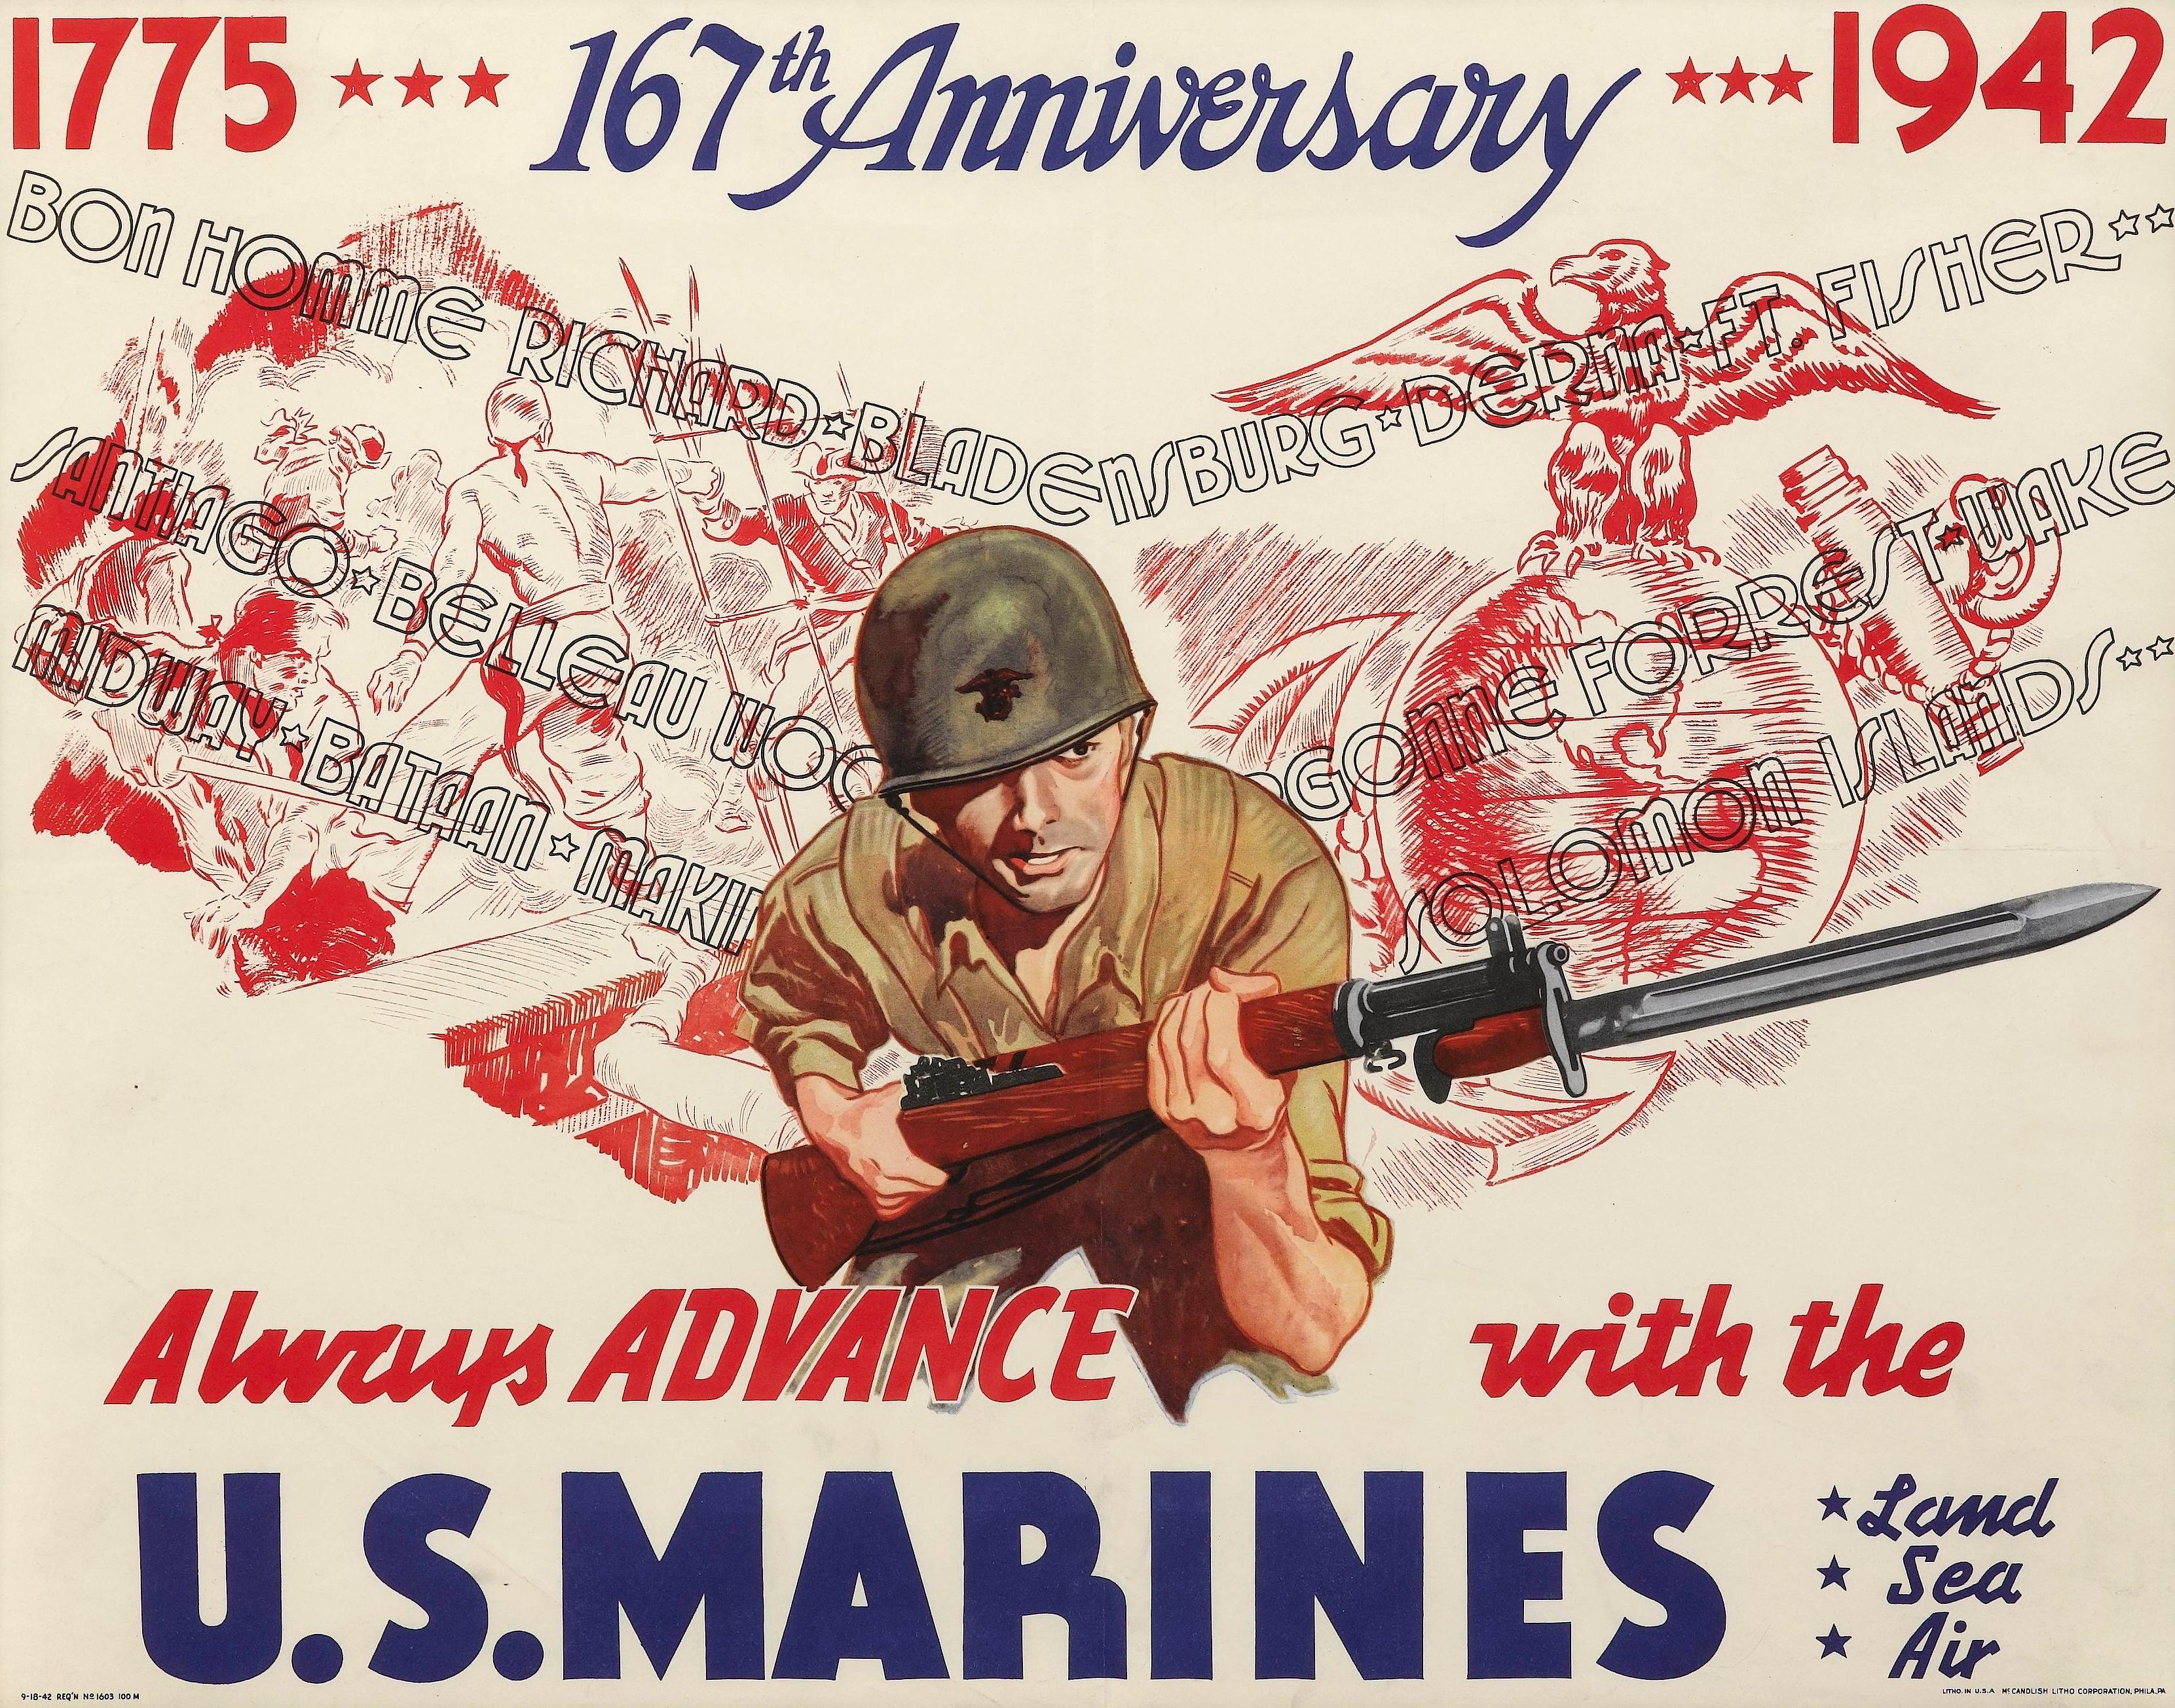 Presented is a vintage 1942 United States Marine Corps poster, celebrating the organization's 167th Anniversary. The poster features a dynamic illustration of an American marine wearing a green helmet with the Marines iconic eagle, globe, and anchor